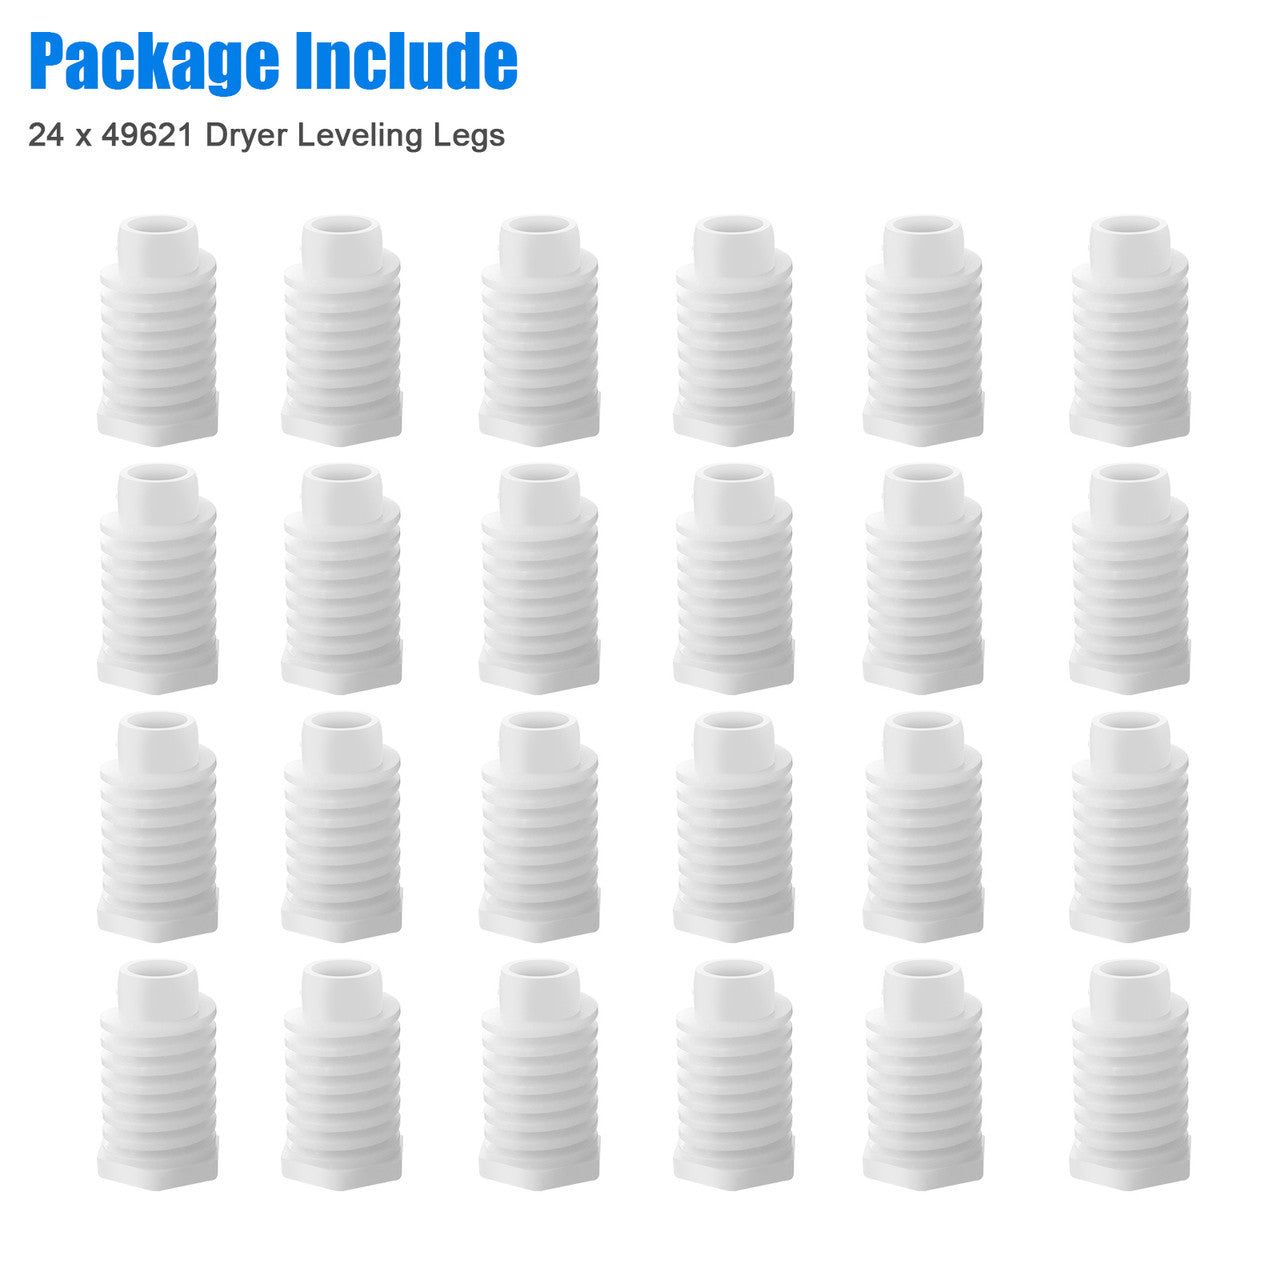 24 Pcs 49621 Dryer Leveling Legs - 1.8 IN Replacement for Whirlpool Ken-more Dryer (White)